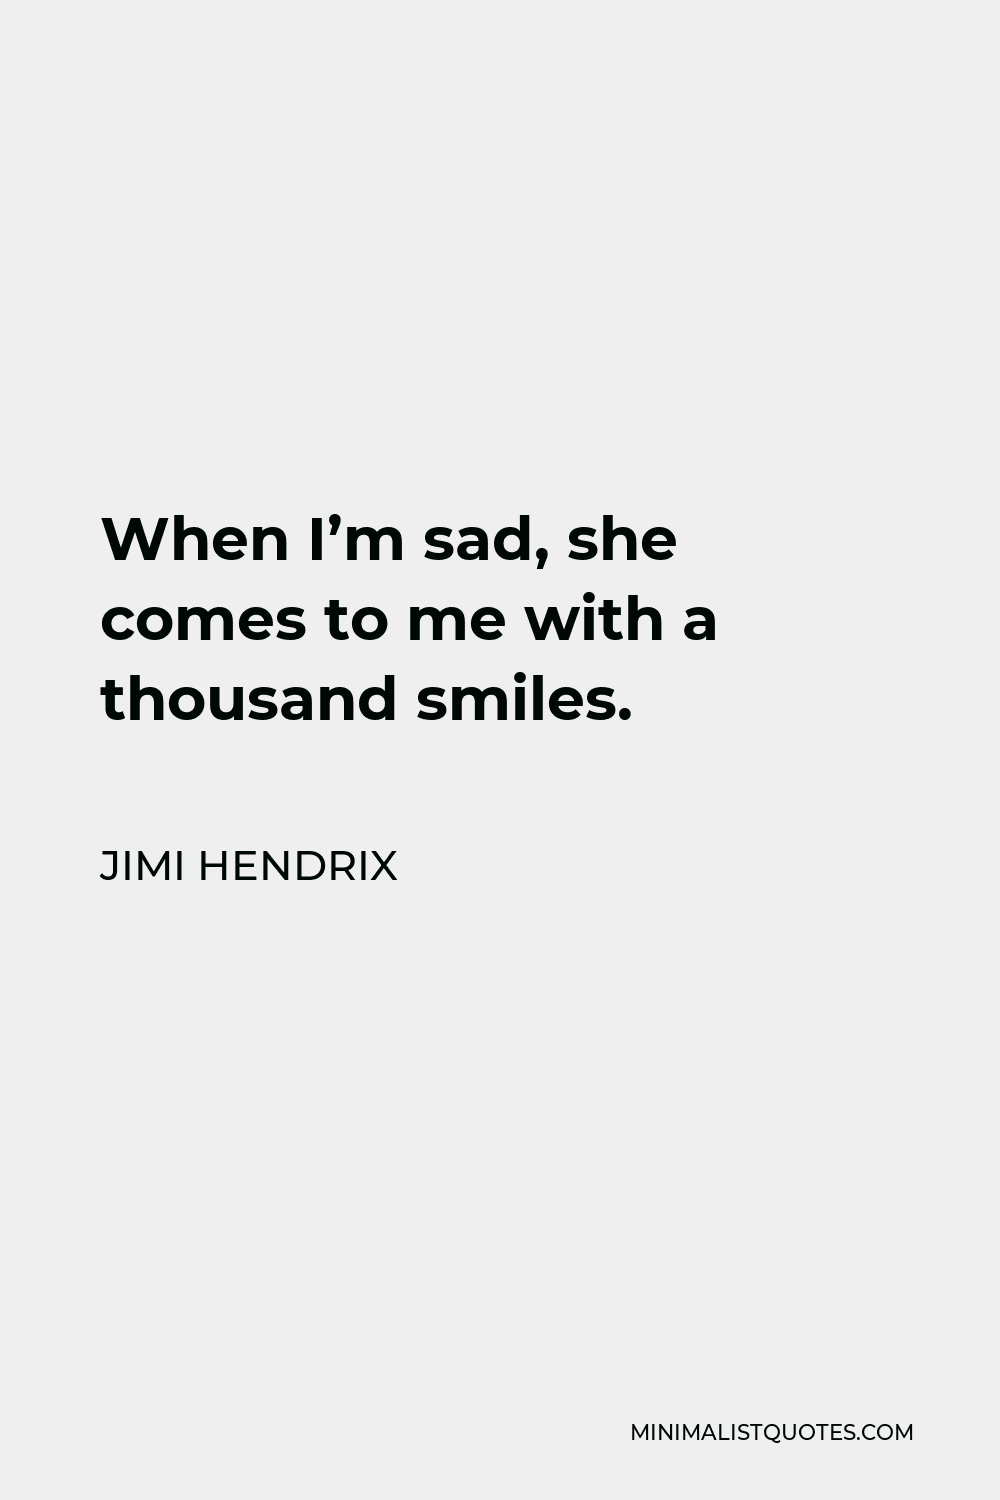 Jimi Hendrix Quote - When I’m sad, she comes to me with a thousand smiles.